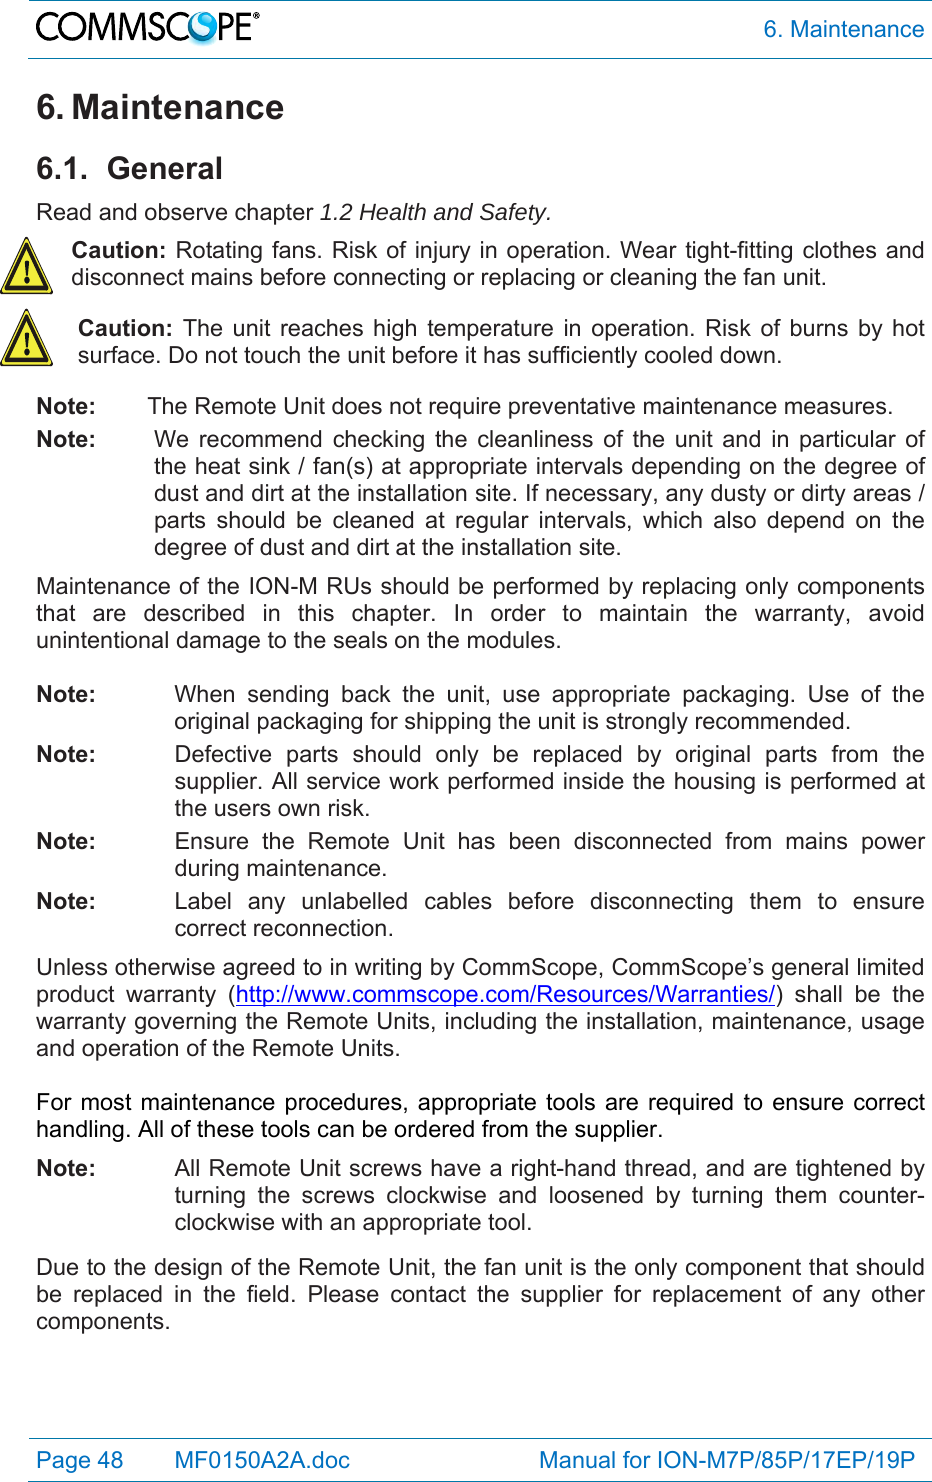  6. Maintenance Page 48   MF0150A2A.doc                             Manual for ION-M7P/85P/17EP/19P  6. Maintenance 6.1. General Read and observe chapter 1.2 Health and Safety. Caution: Rotating fans. Risk of injury in operation. Wear tight-fitting clothes and disconnect mains before connecting or replacing or cleaning the fan unit. Caution: The unit reaches high temperature in operation. Risk of burns by hot surface. Do not touch the unit before it has sufficiently cooled down. Note:  The Remote Unit does not require preventative maintenance measures. Note:  We recommend checking the cleanliness of the unit and in particular of the heat sink / fan(s) at appropriate intervals depending on the degree of dust and dirt at the installation site. If necessary, any dusty or dirty areas / parts should be cleaned at regular intervals, which also depend on the degree of dust and dirt at the installation site. Maintenance of the ION-M RUs should be performed by replacing only components that are described in this chapter. In order to maintain the warranty, avoid unintentional damage to the seals on the modules.  Note:  When sending back the unit, use appropriate packaging. Use of the original packaging for shipping the unit is strongly recommended. Note:  Defective parts should only be replaced by original parts from the supplier. All service work performed inside the housing is performed at the users own risk. Note:  Ensure the Remote Unit has been disconnected from mains power during maintenance. Note:  Label any unlabelled cables before disconnecting them to ensure correct reconnection. Unless otherwise agreed to in writing by CommScope, CommScope’s general limited product warranty (http://www.commscope.com/Resources/Warranties/) shall be the warranty governing the Remote Units, including the installation, maintenance, usage and operation of the Remote Units.  For most maintenance procedures, appropriate tools are required to ensure correct handling. All of these tools can be ordered from the supplier.  Note:   All Remote Unit screws have a right-hand thread, and are tightened by turning the screws clockwise and loosened by turning them counter-clockwise with an appropriate tool.  Due to the design of the Remote Unit, the fan unit is the only component that should be replaced in the field. Please contact the supplier for replacement of any other components.  